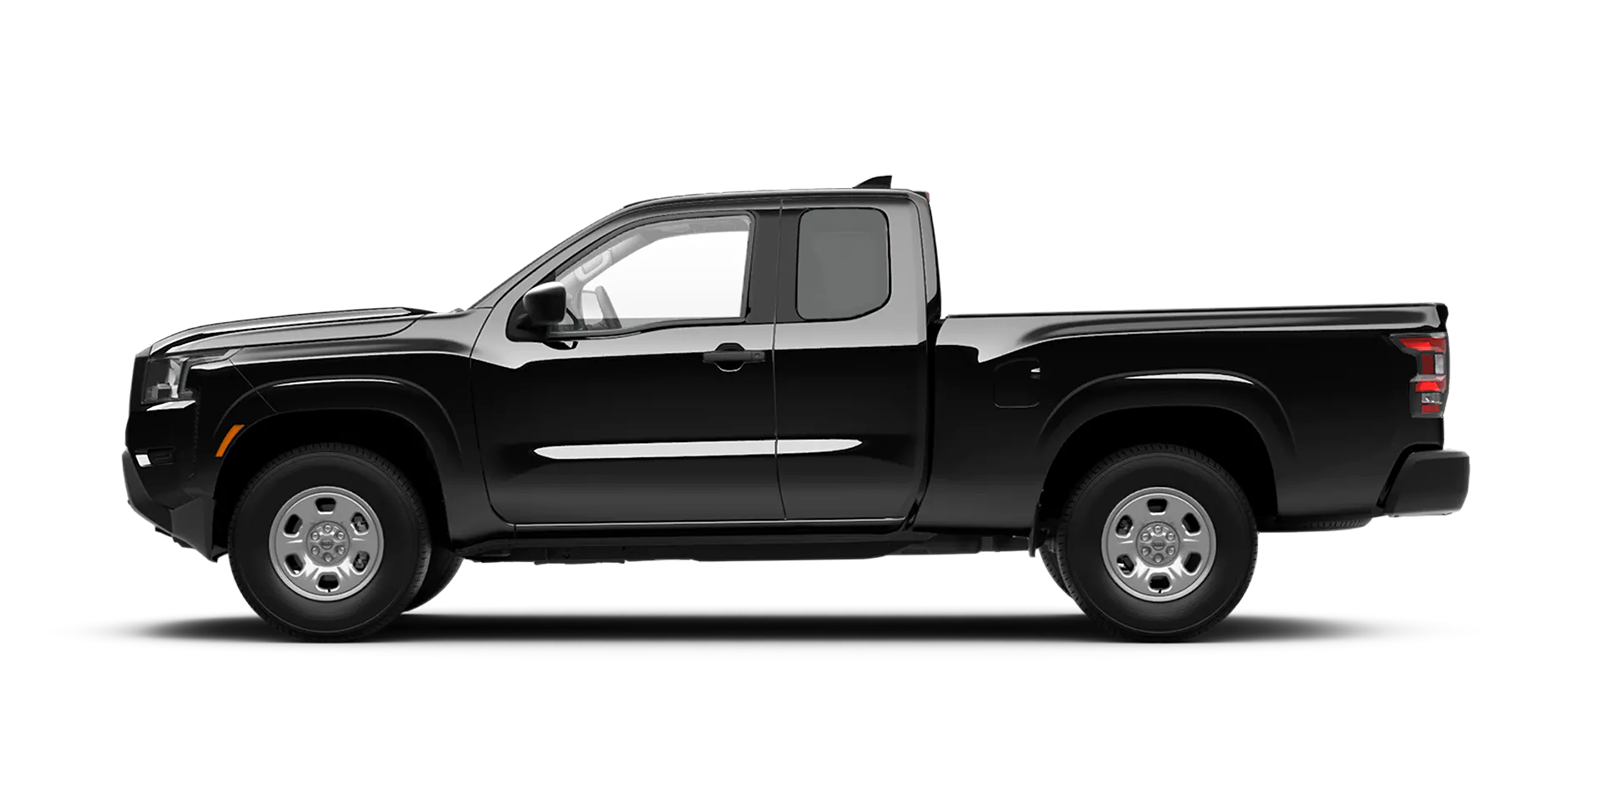 2022 Frontier King Cab S 4x4 in Super Black | Nissan City of Springfield in Springfield NJ